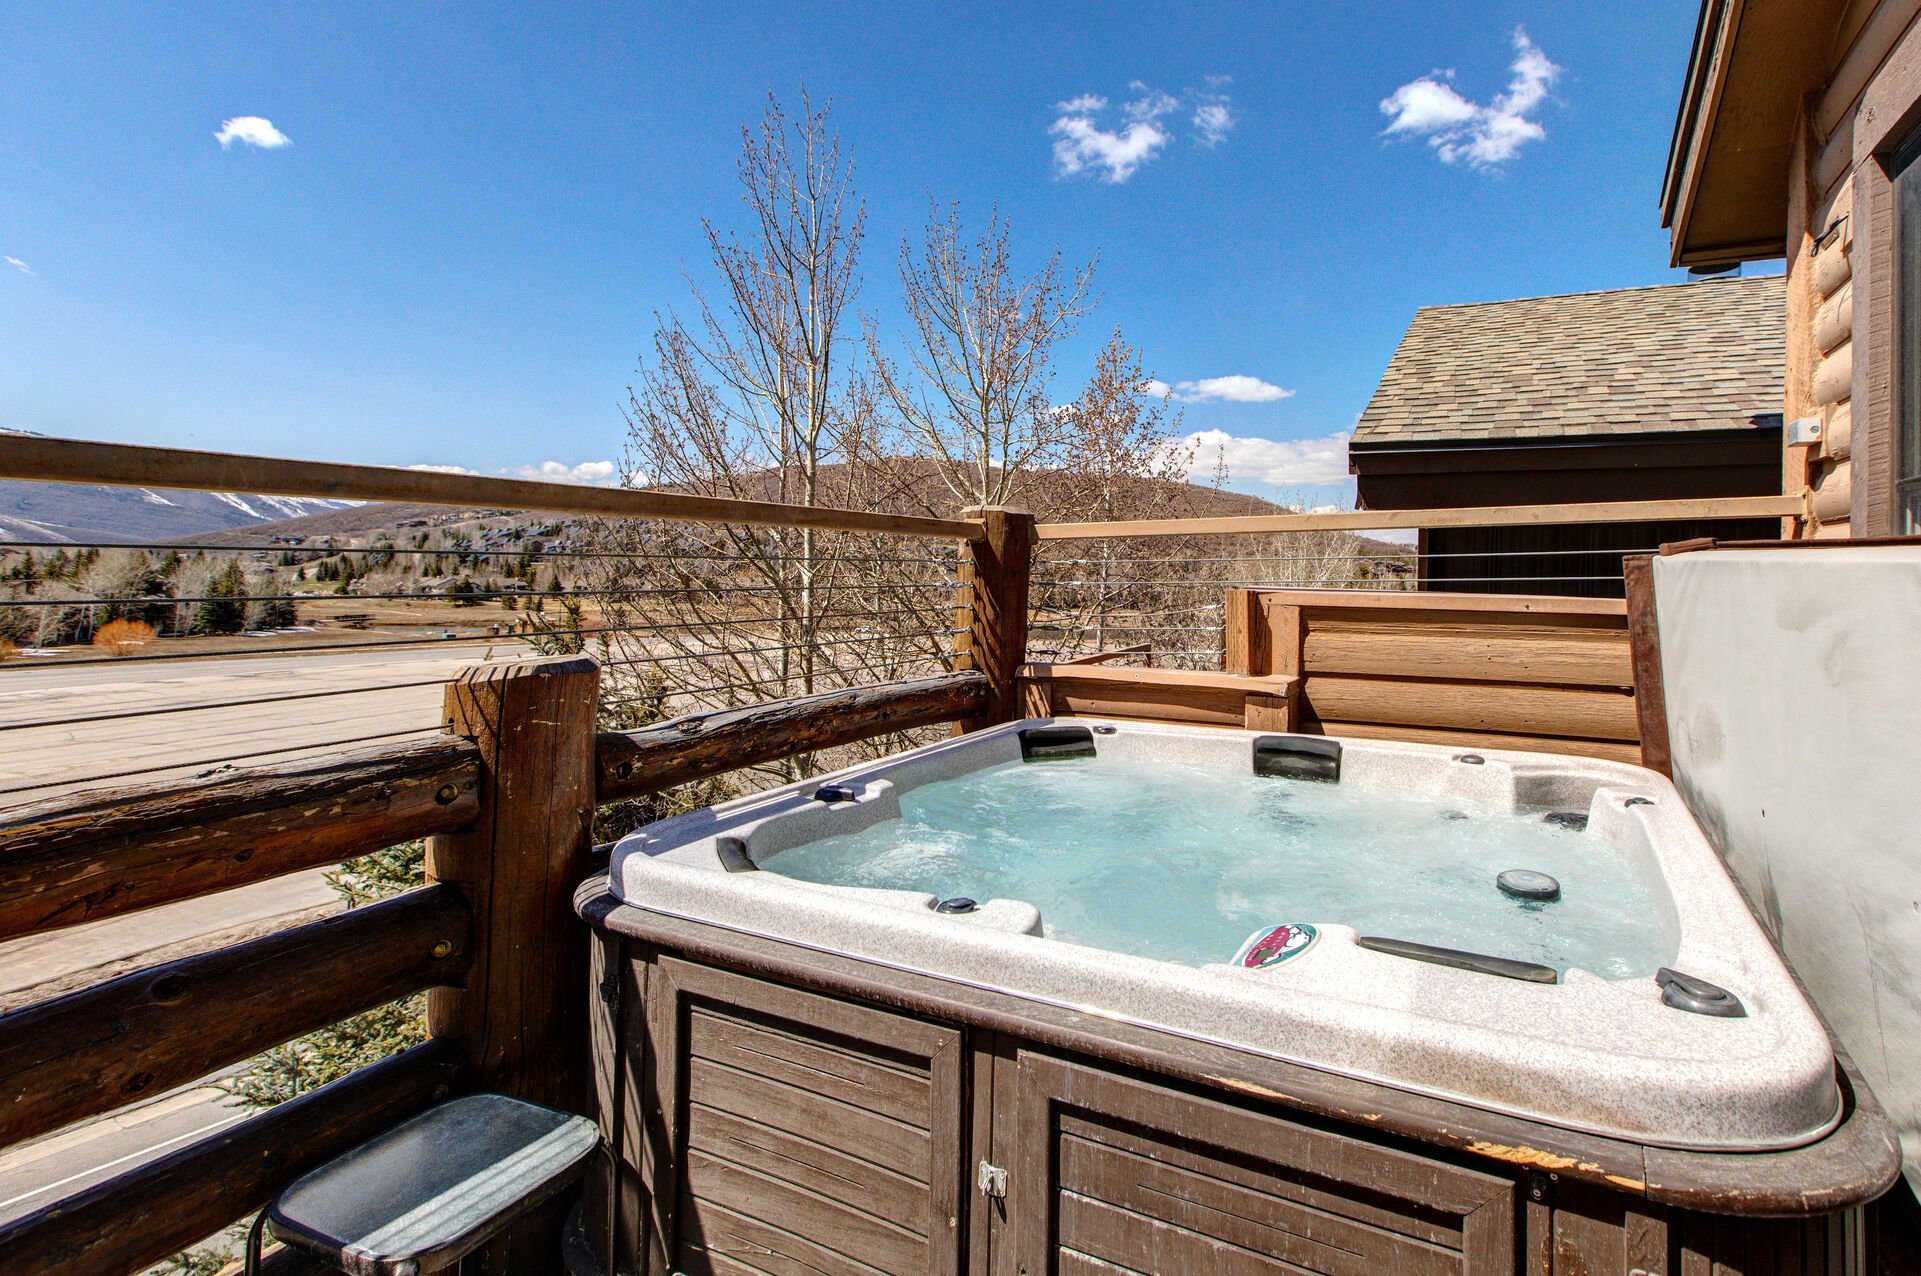 Private Deck with a New a 3-Person Hot Tub